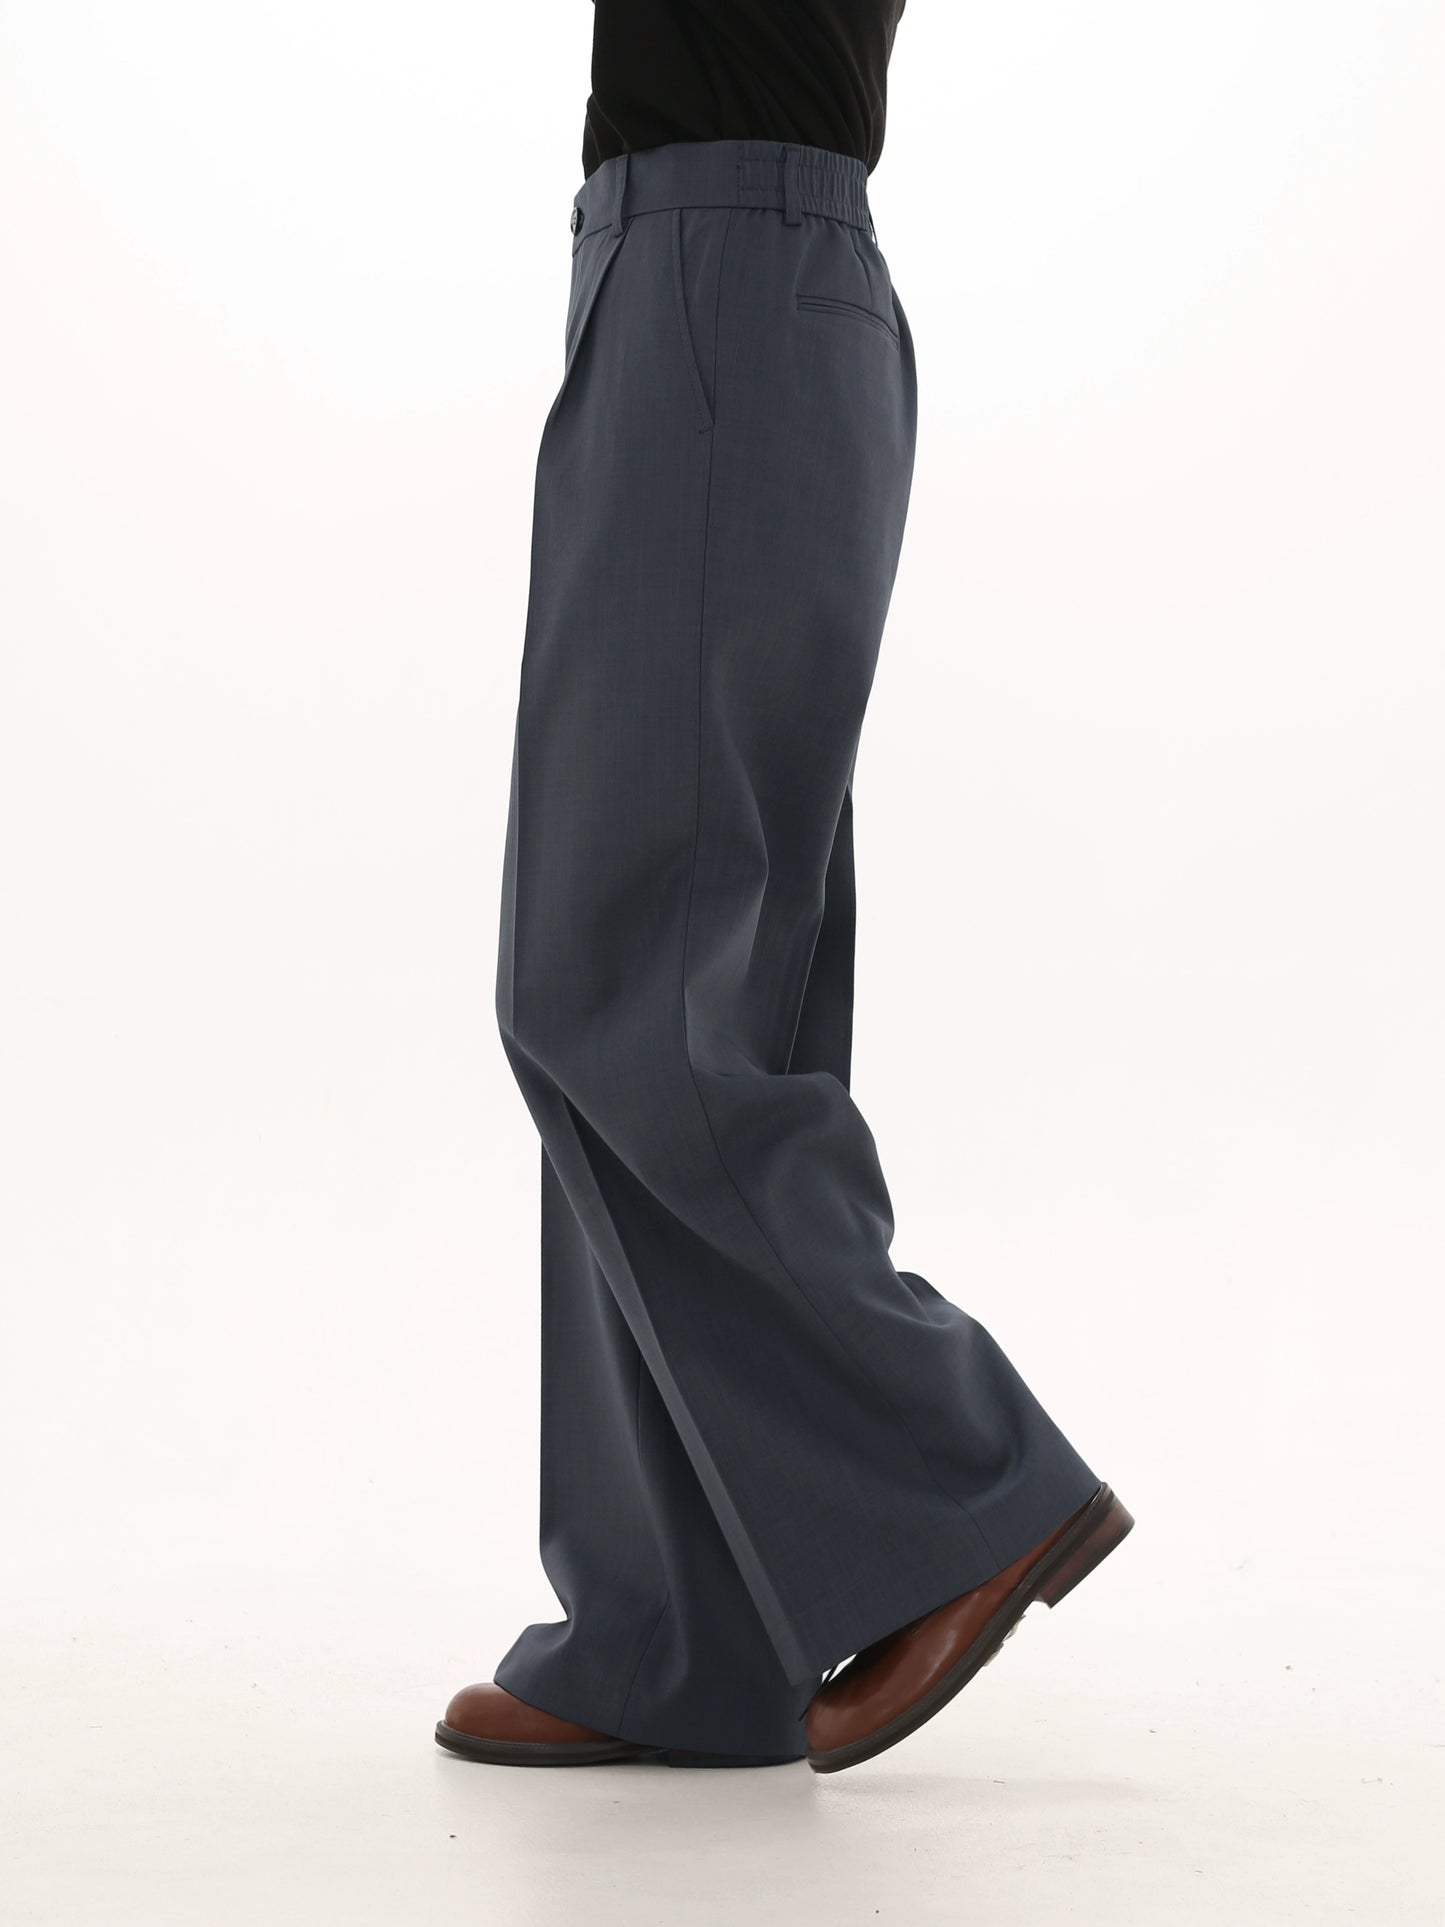 GIBBYCNA Spring New!Elasticated waist straight trousers for men and women loose casual and versatile slim suit pants